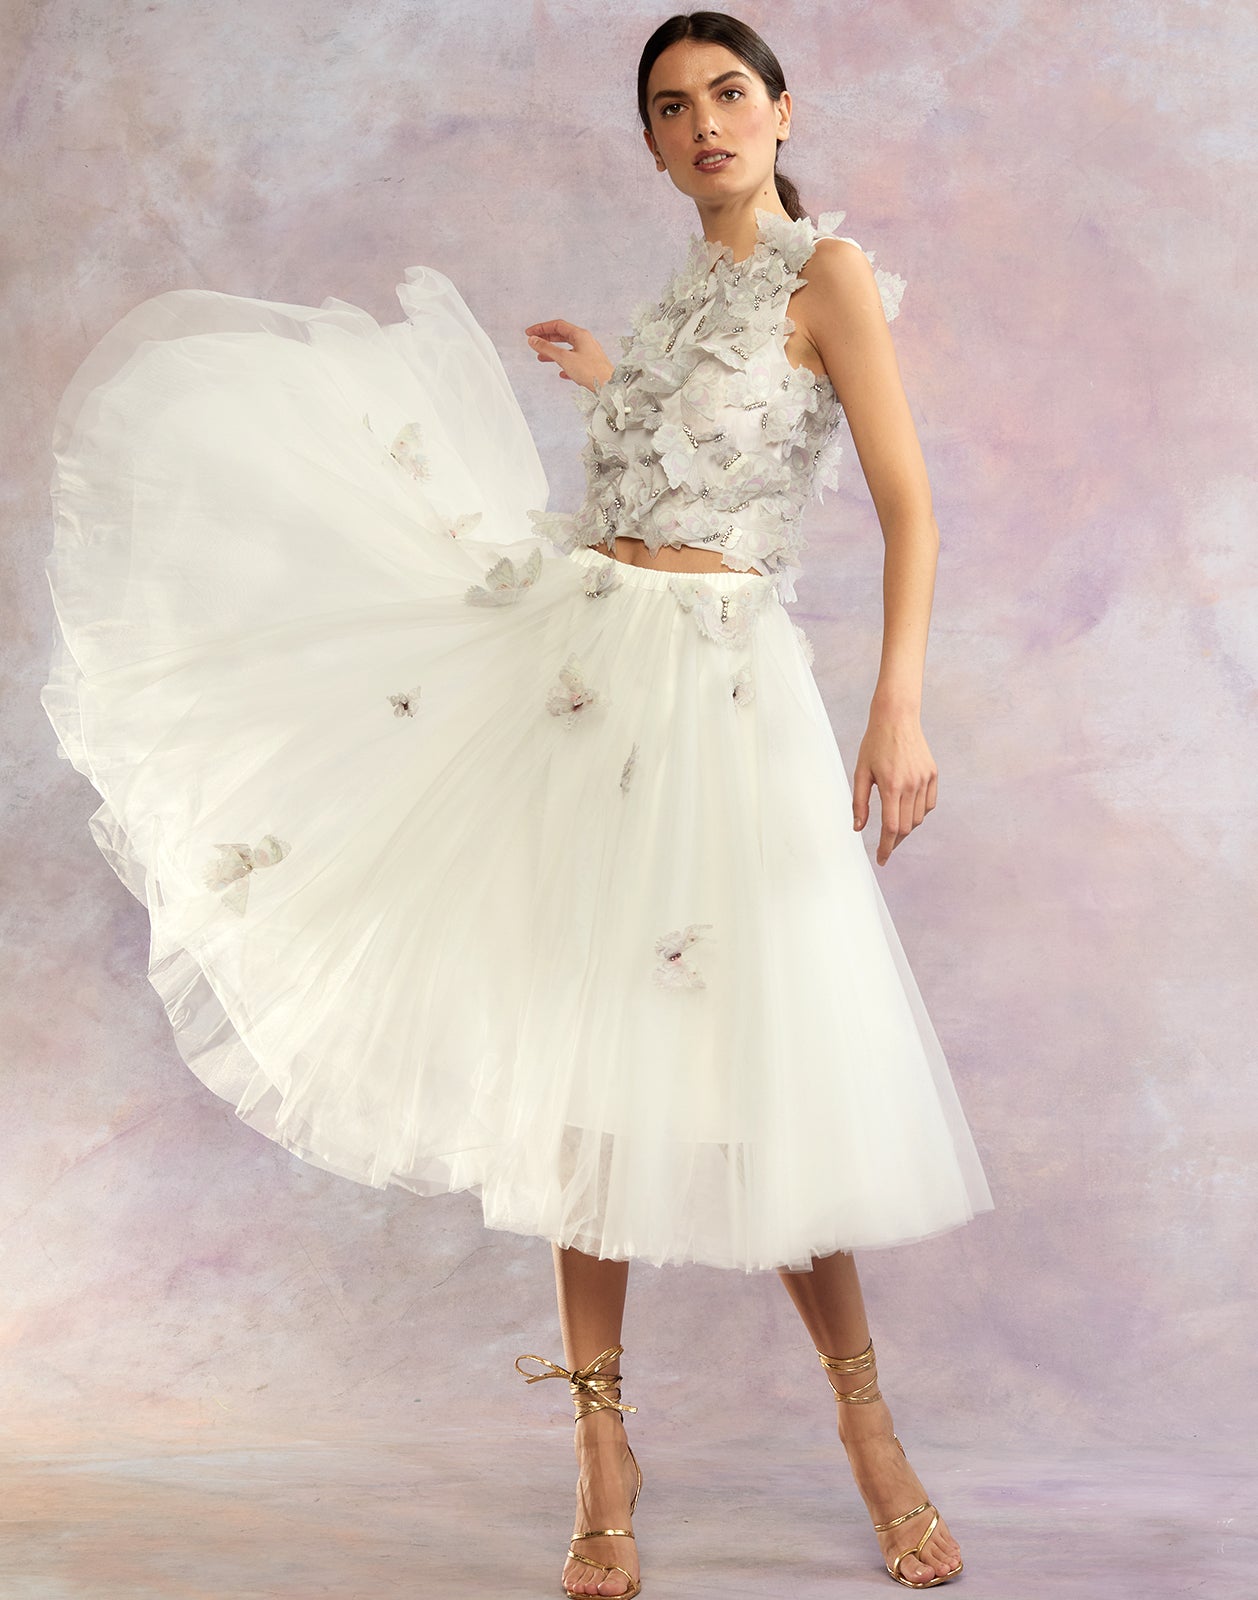 Butterfly Tulle Skirt – Cynthia Rowley